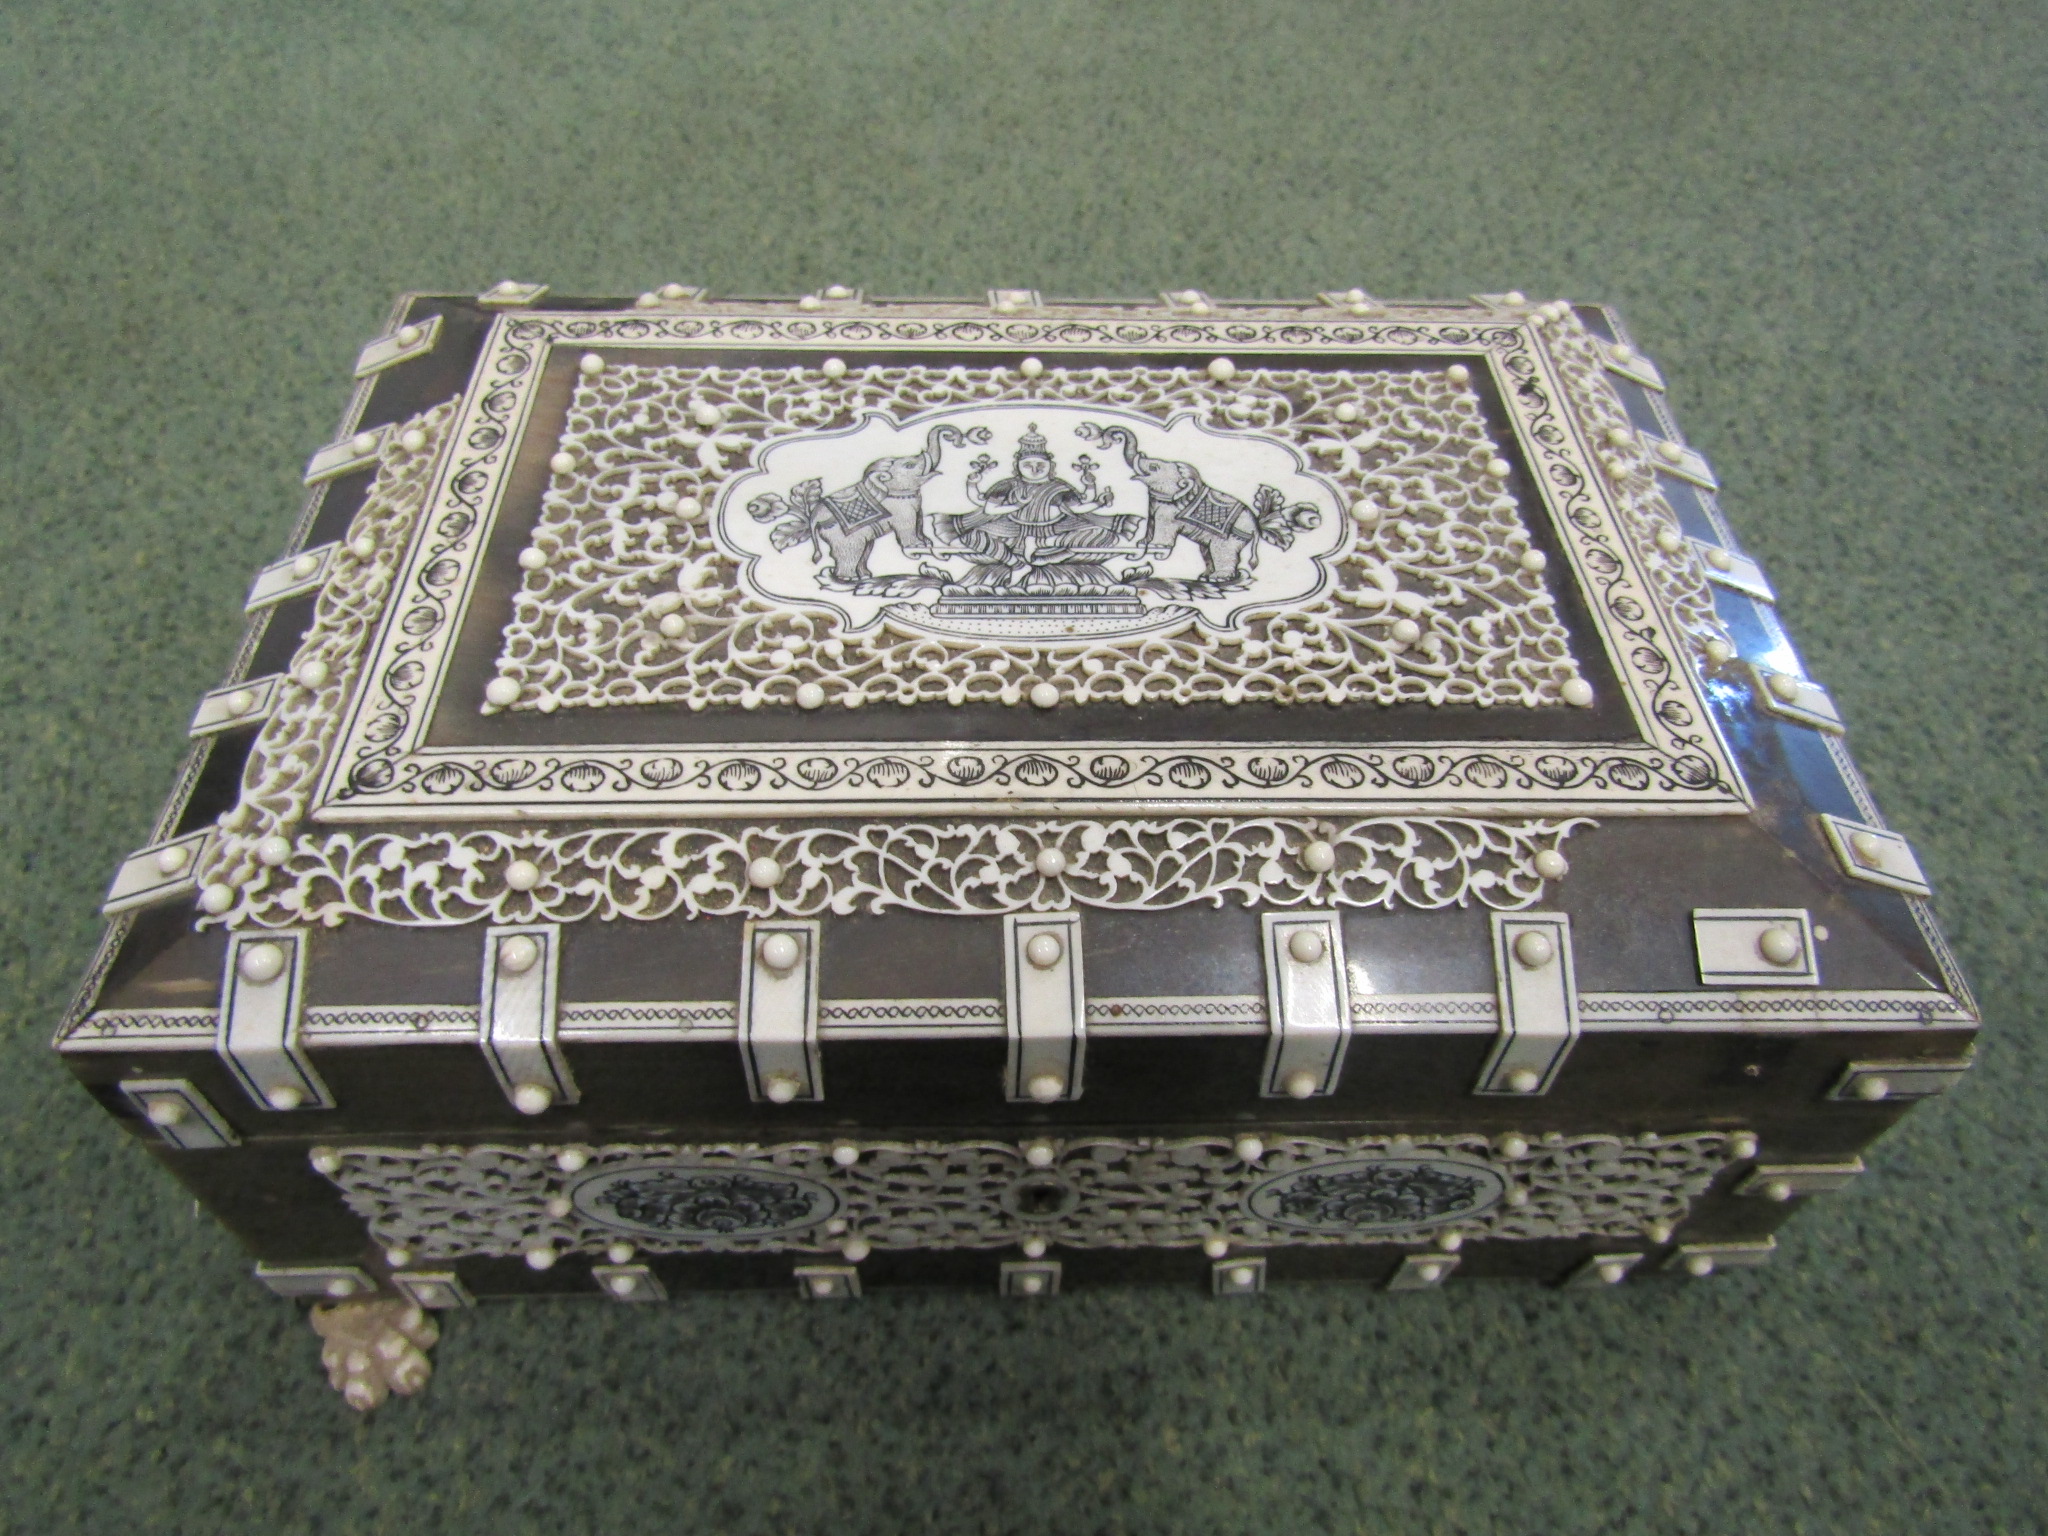 Vizagapatam casket the lid with central panel decorated with a Buddhistic deity - Image 4 of 4